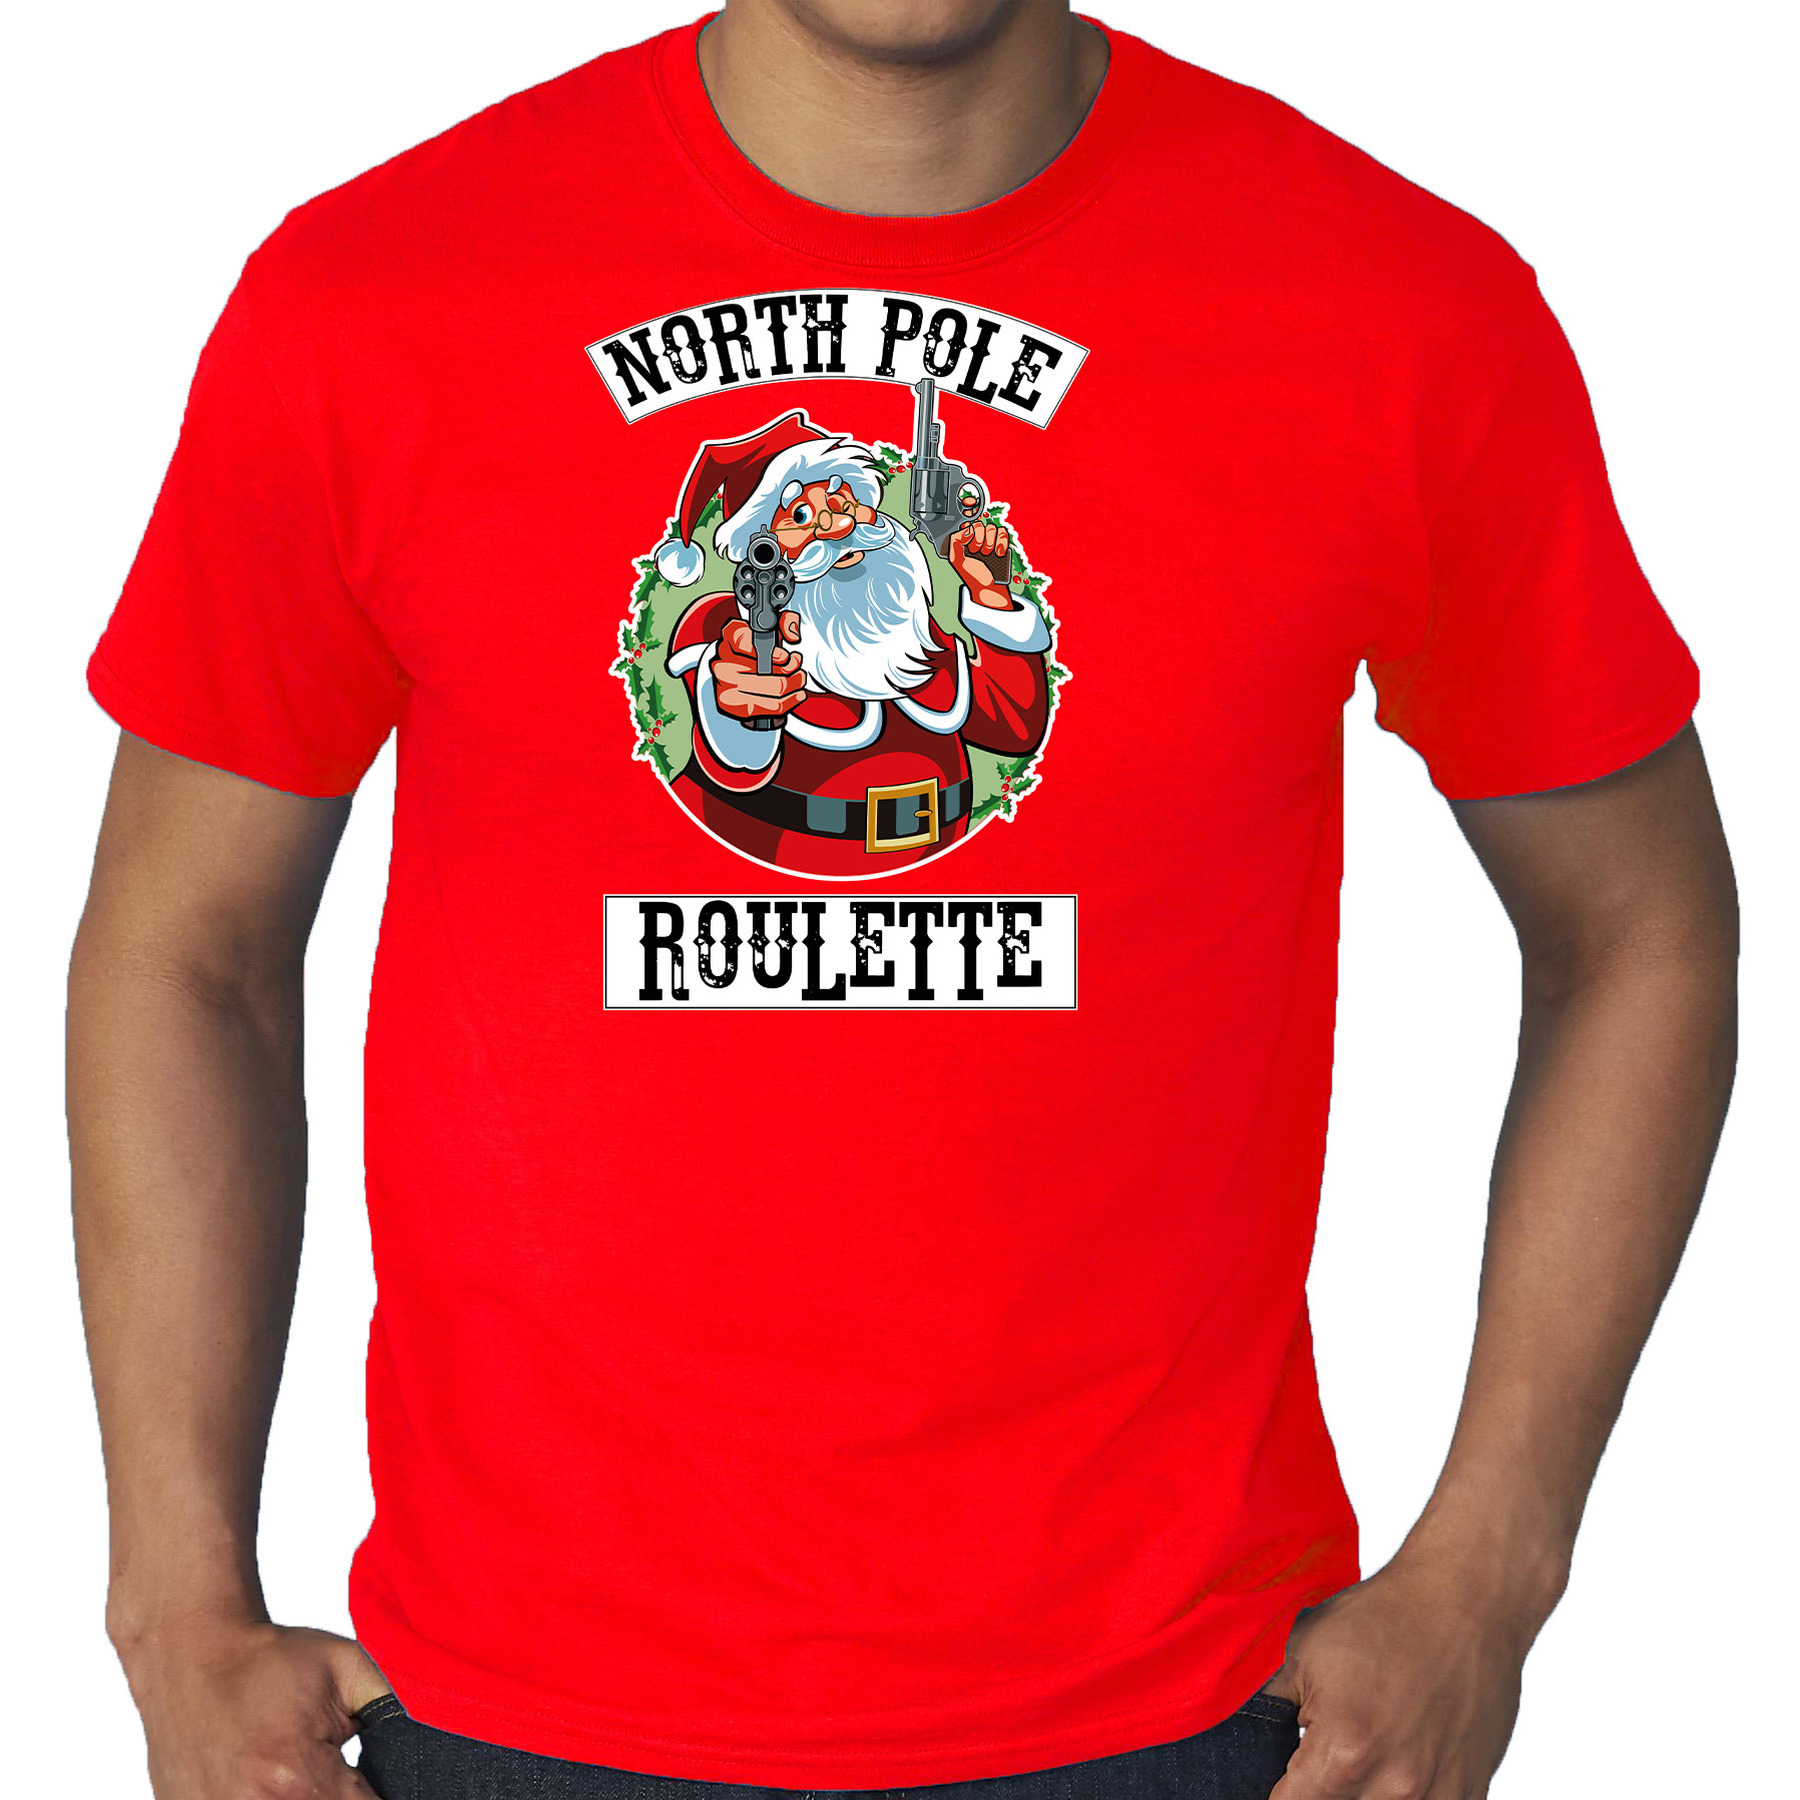 Grote maten fout Kerstshirt - outfit Northpole roulette rood voor heren